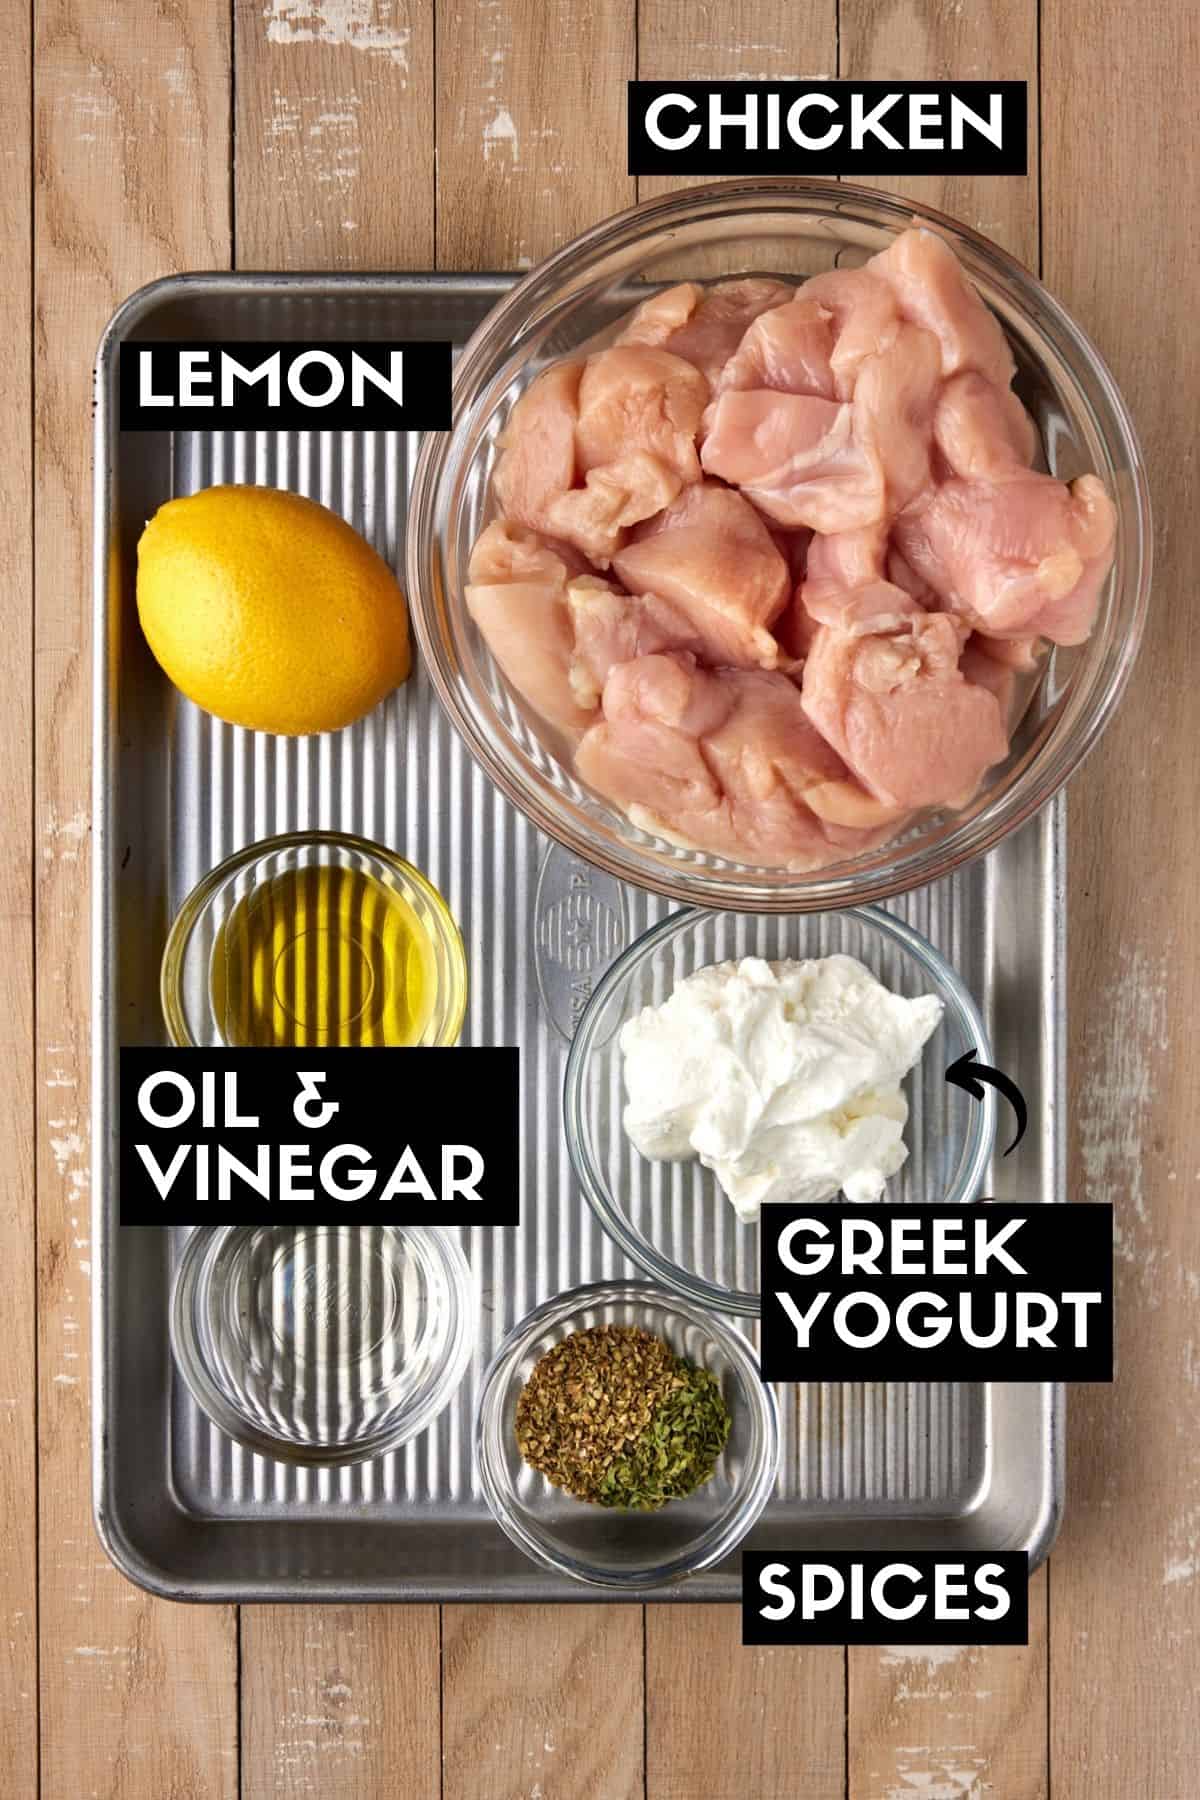 ingredients needed to make chicken souvlaki and marinade.